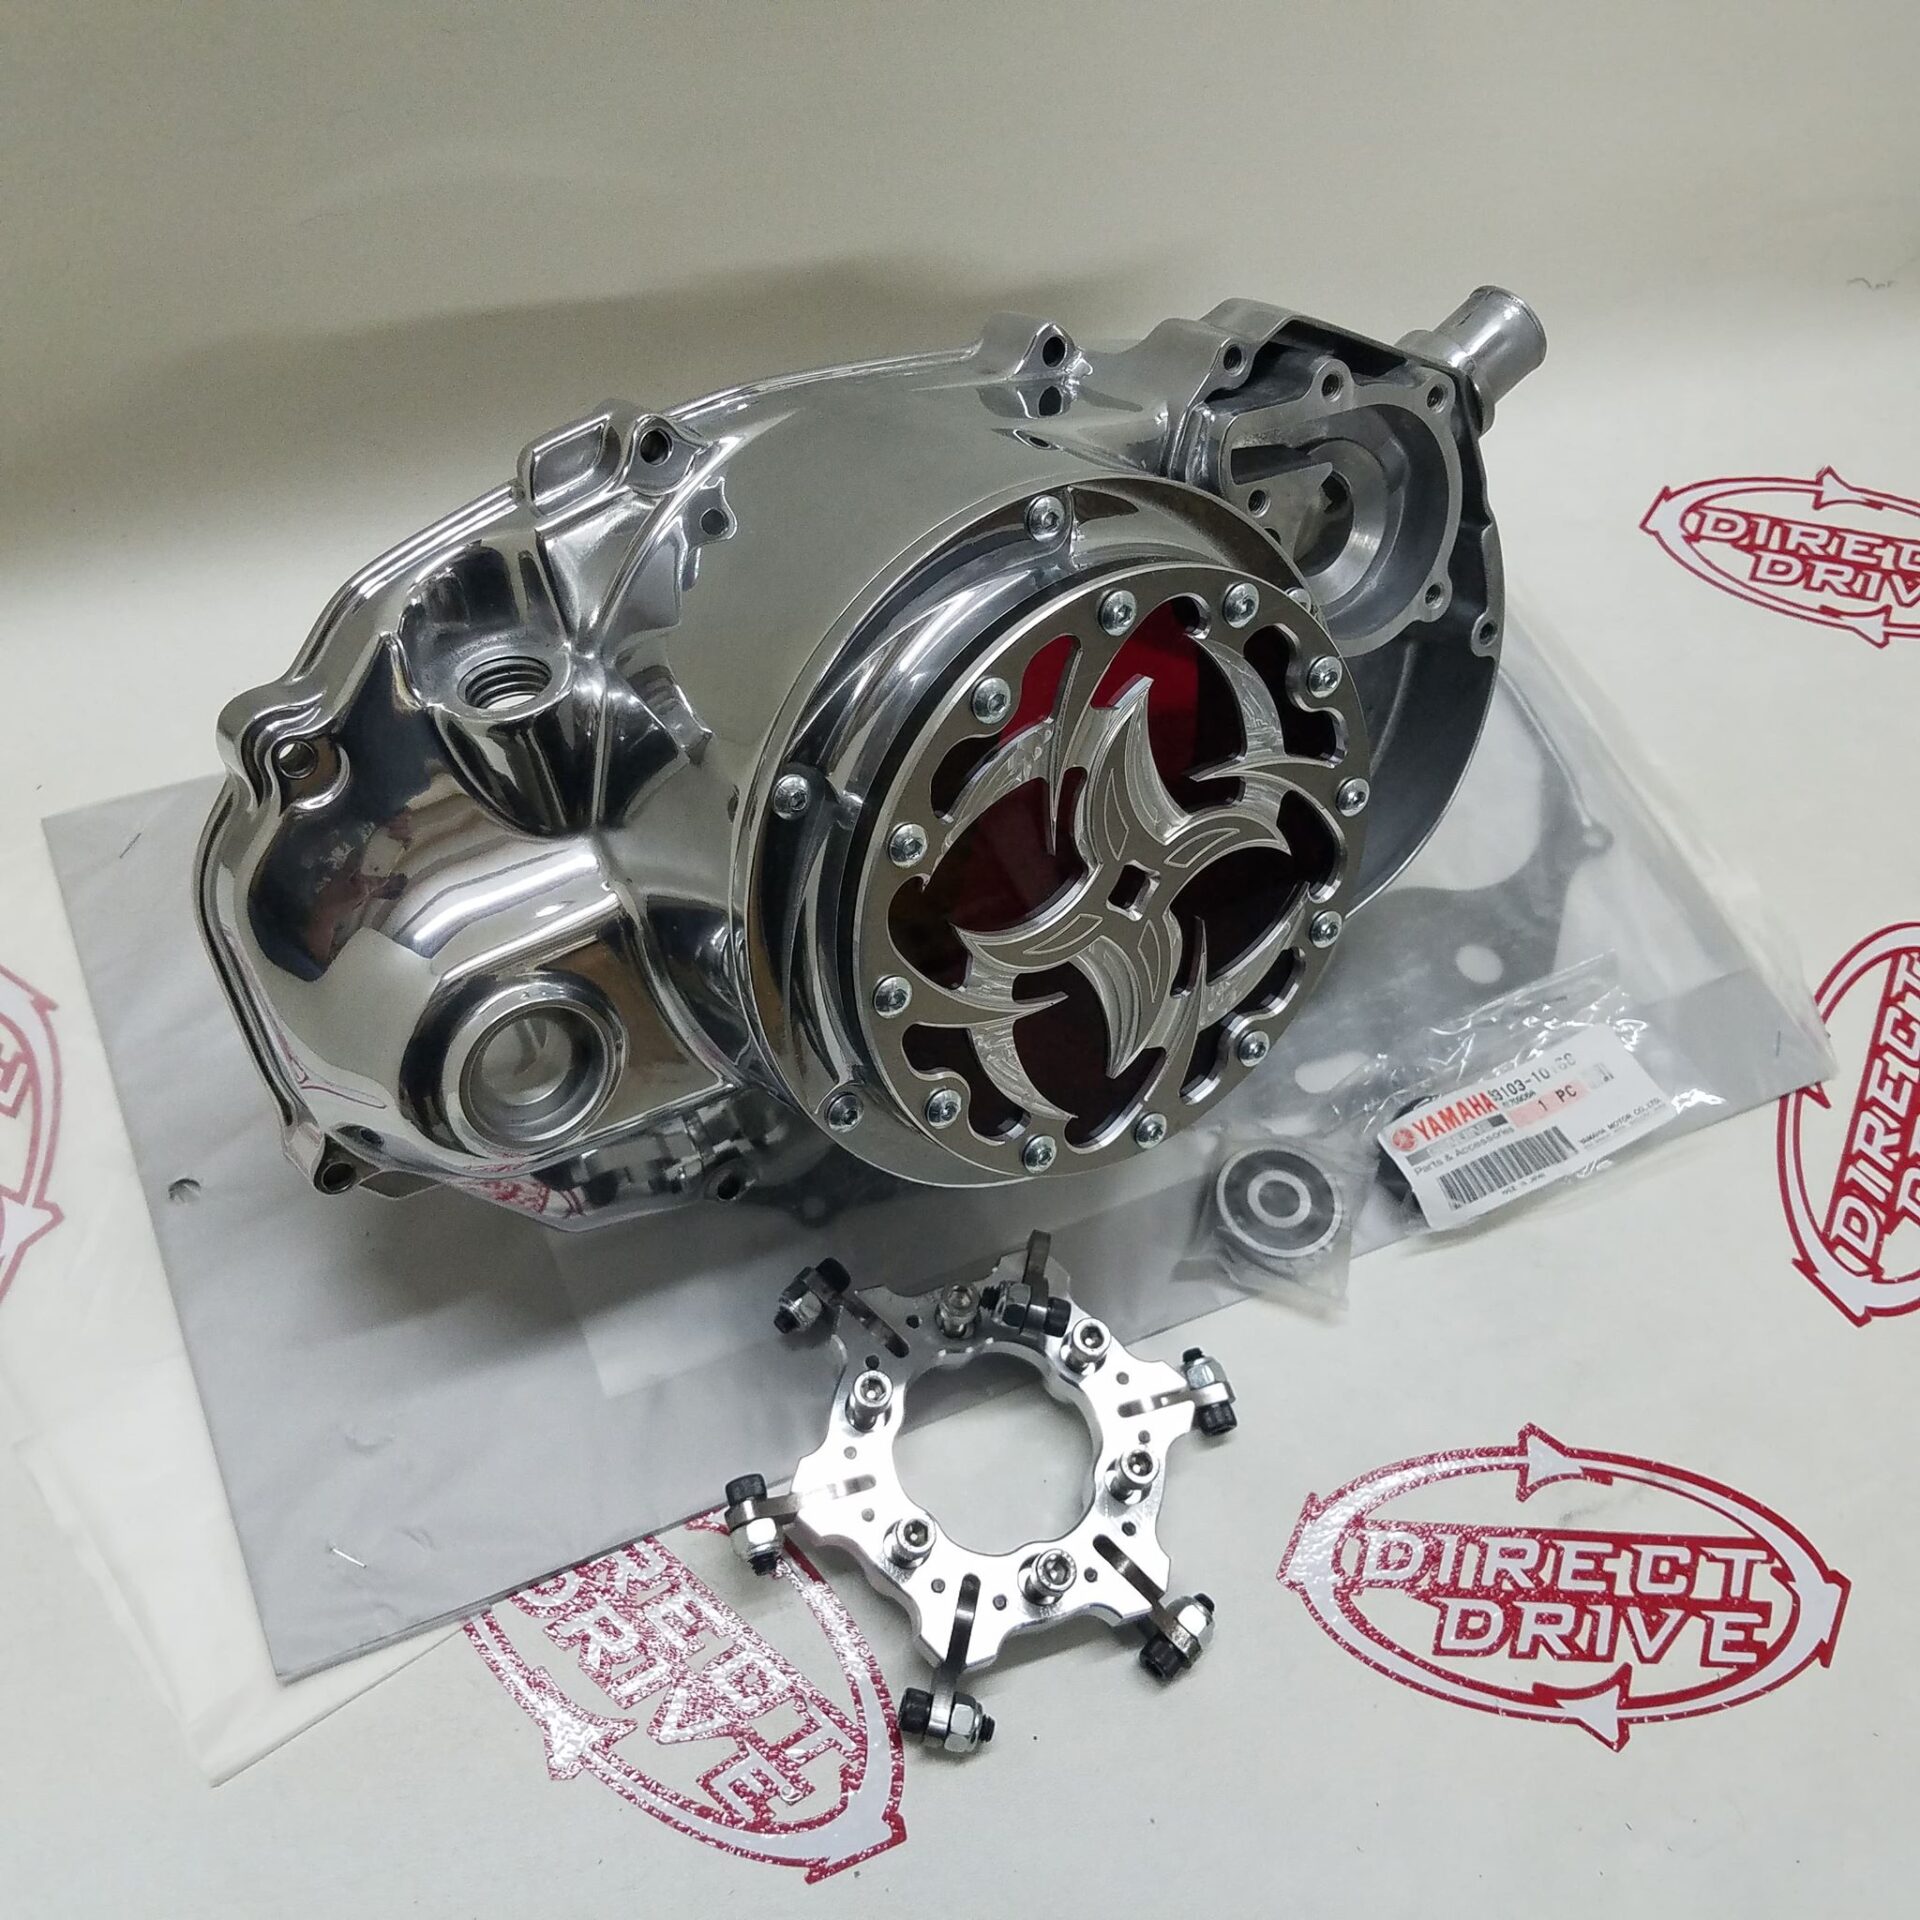 Polished Banshee clutch Cover Kit With Silver Stiff Ring